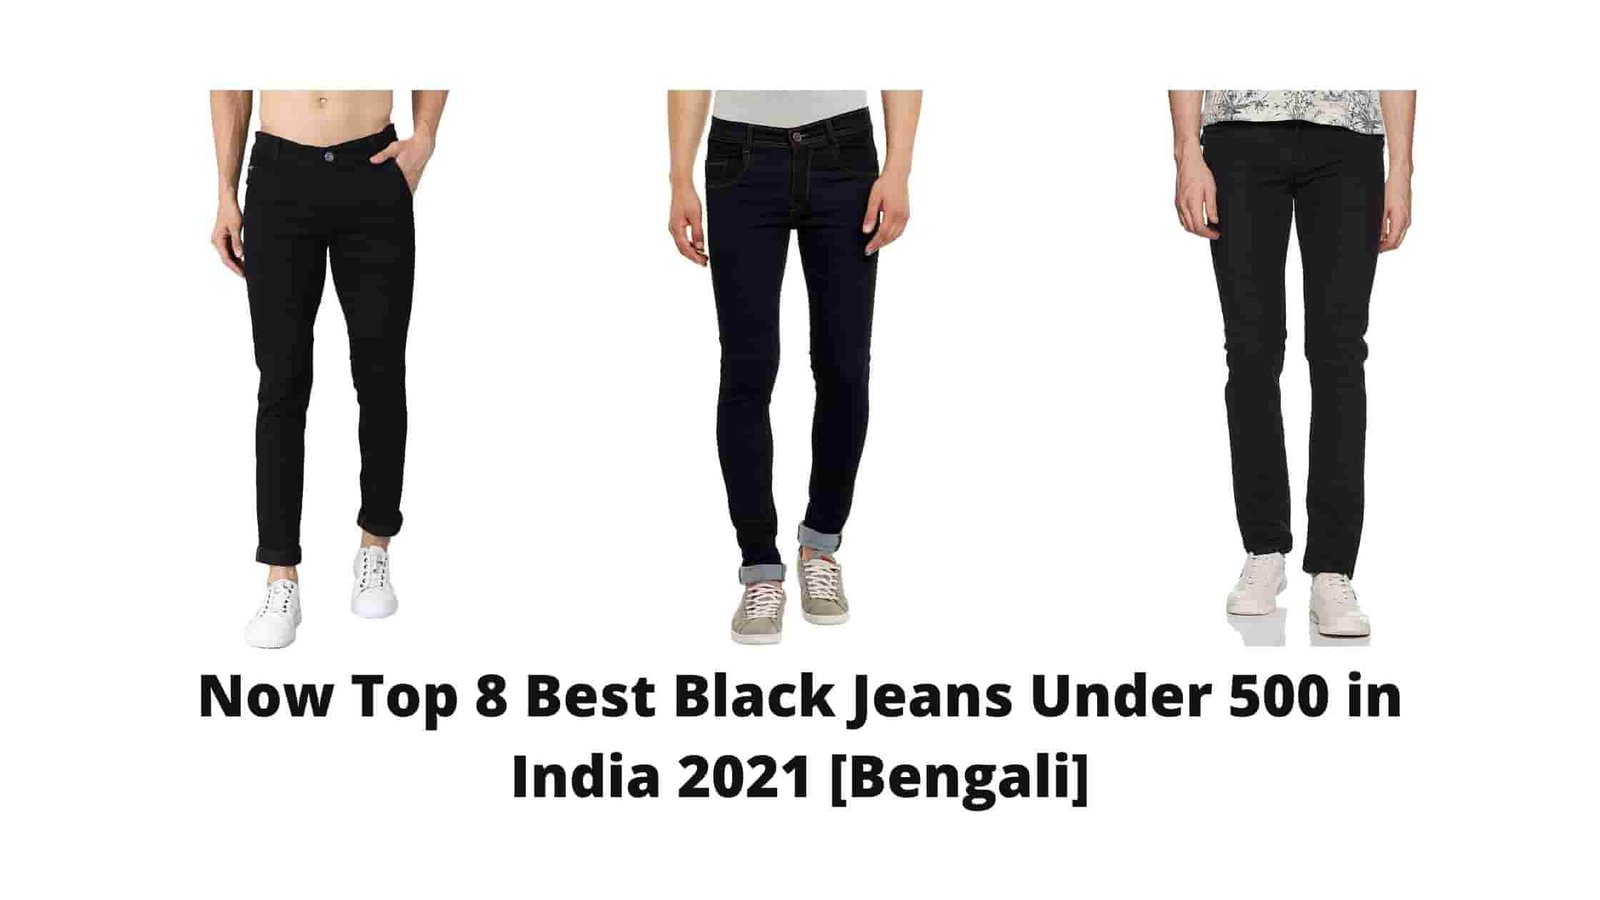 Now Top 8 Best Black Jeans Under 500 in India 2021 [Bengali]